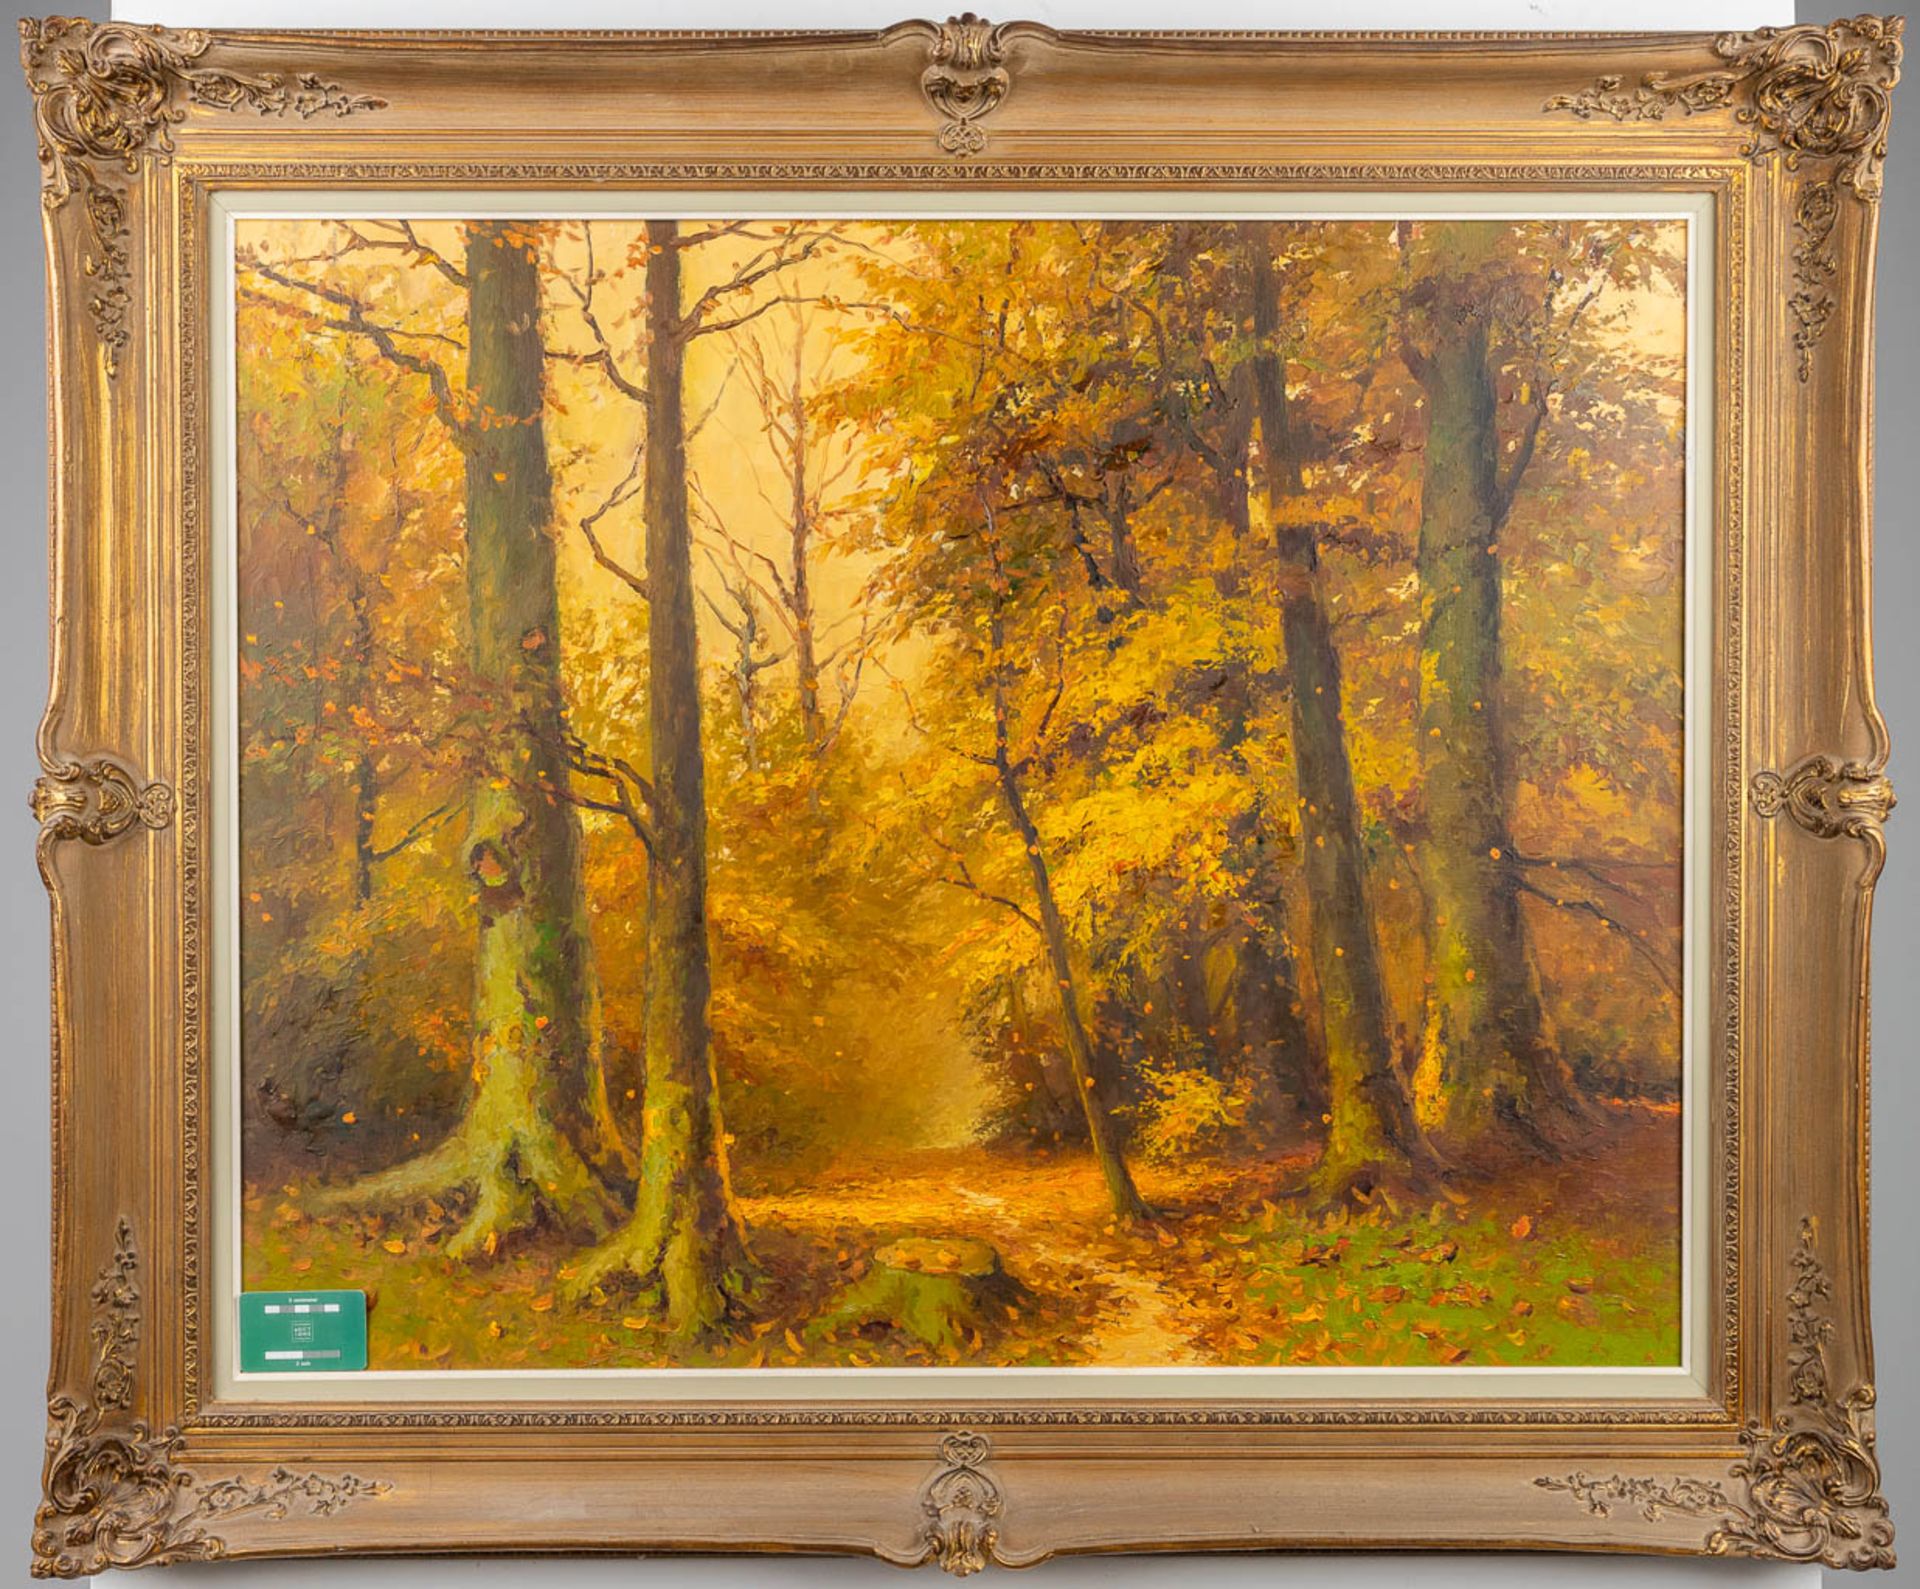 Albert DEMOEN (1916) 'Forest View' oil on canvas. (100 x 80cm) - Image 5 of 6